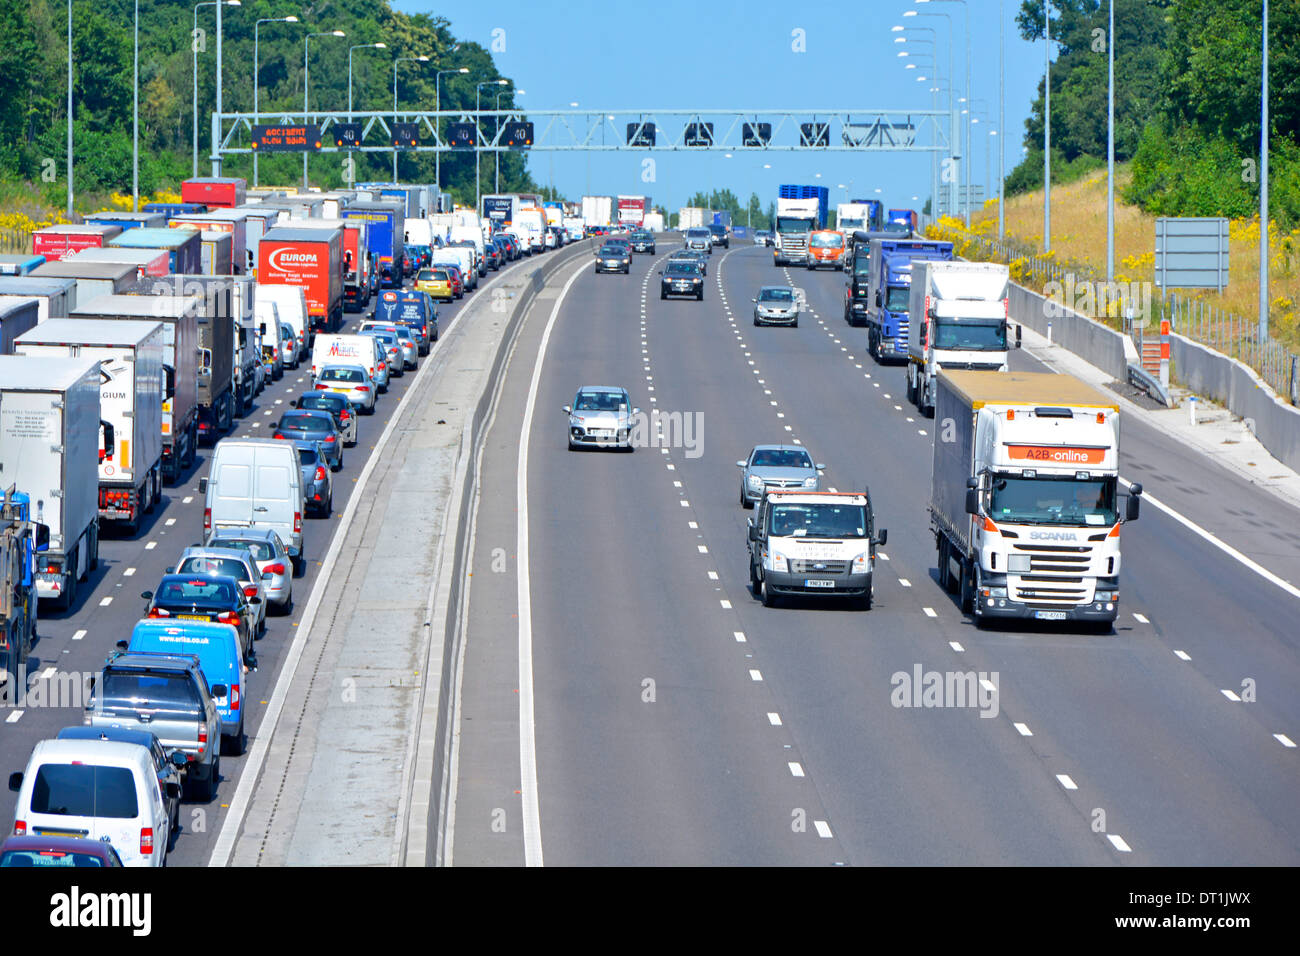 Four lane M25 motorway free flowing light traffic passing gridlocked queues of (mainly) trucks with articulated trailers Stock Photo